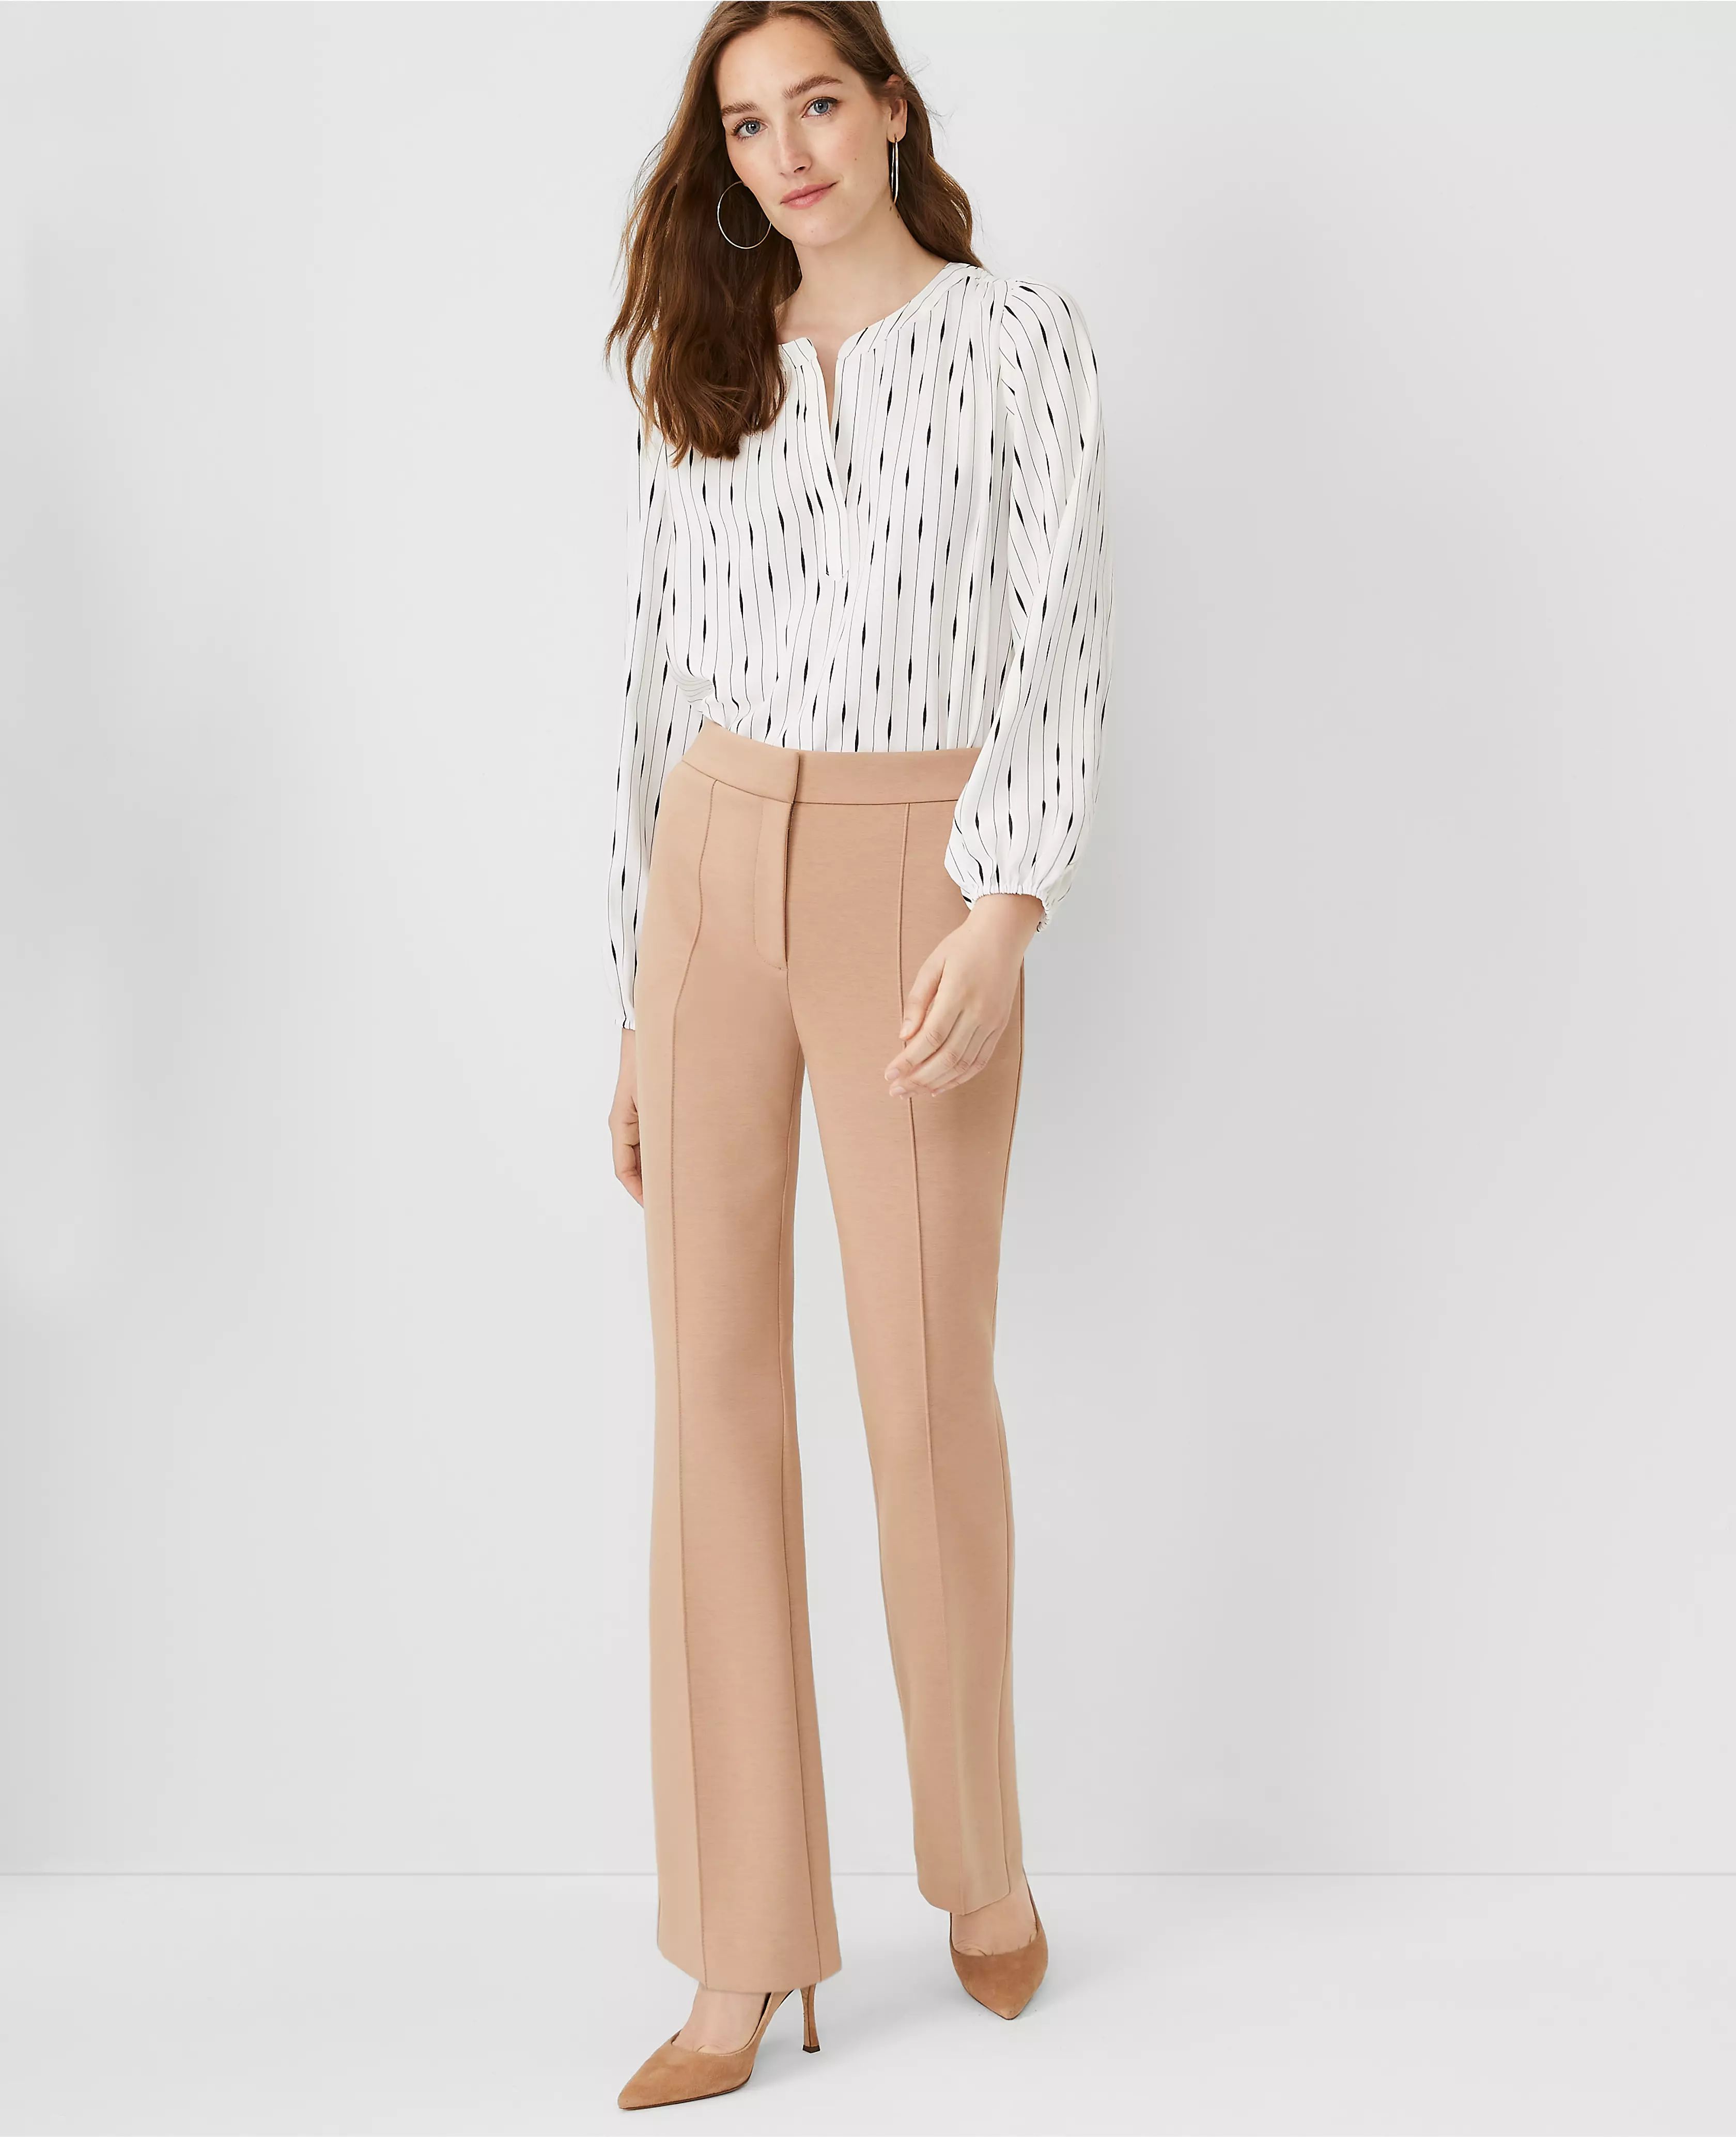 The Pintucked Trouser Pant in Double Knit | Ann Taylor (US)